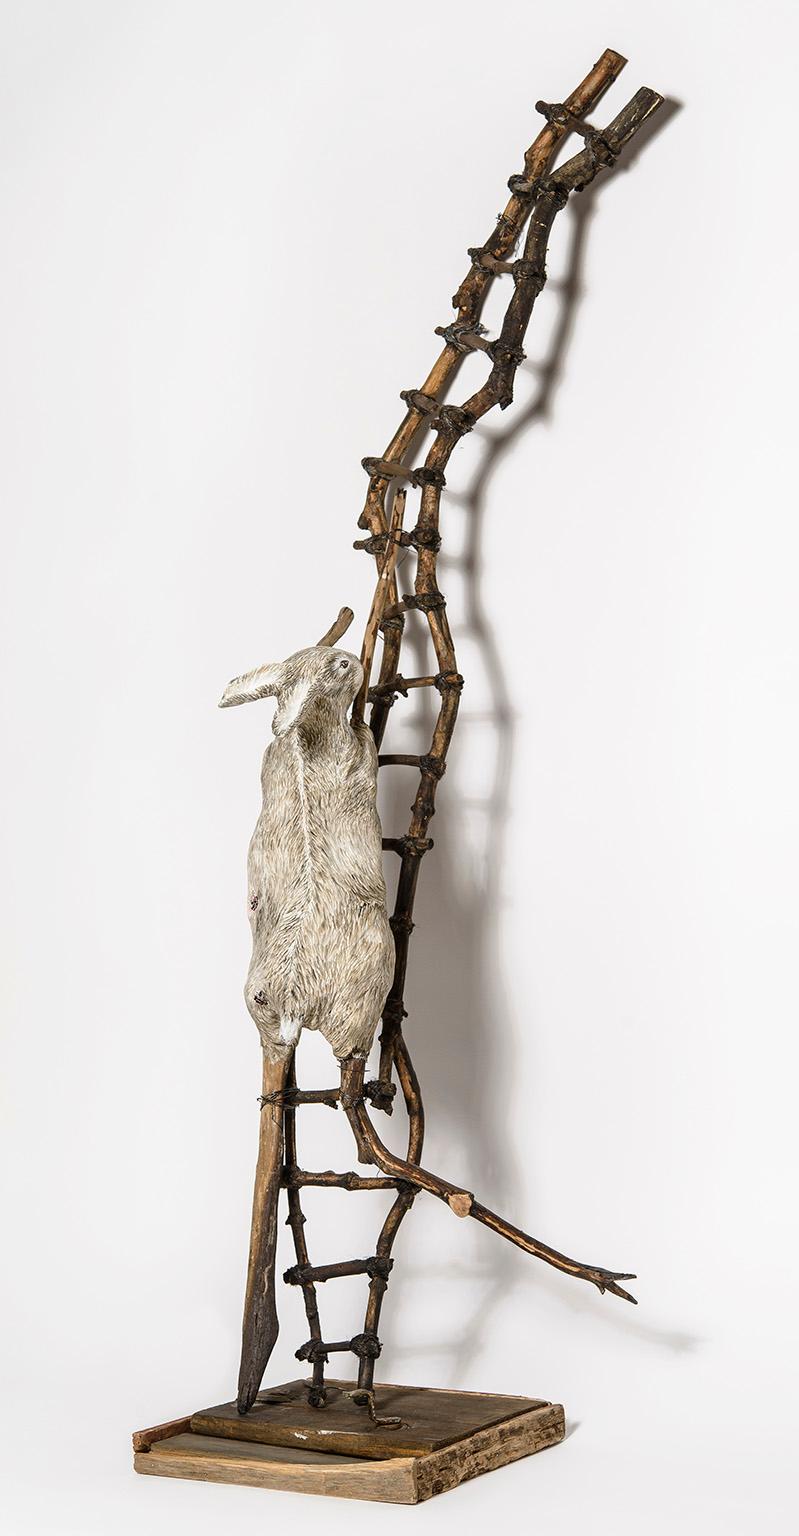 Sculpture of Rabbit crawling up wood ladder: 'Talking about Hard Things'